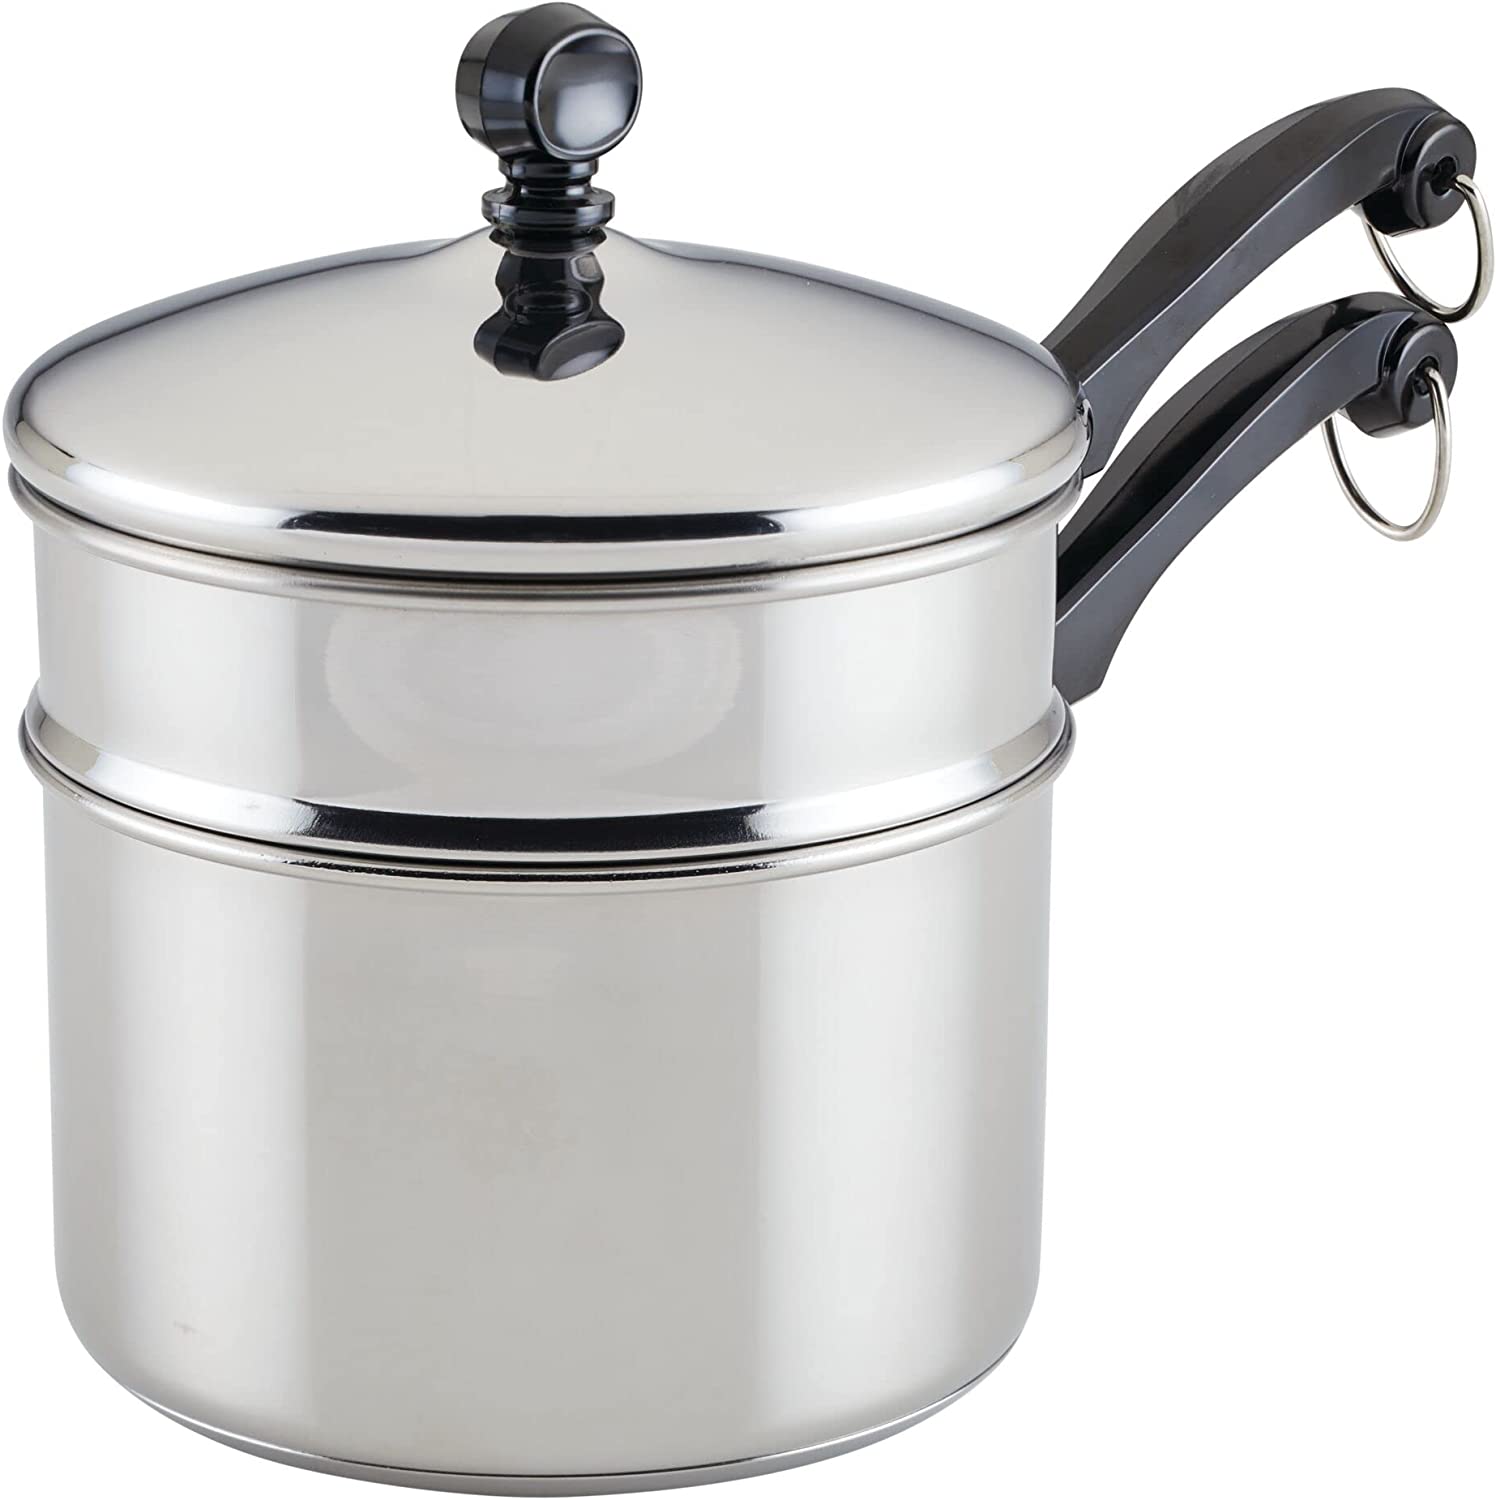 Farberware Traditional Covered Double Boiler For Chocolate, 2-Quart